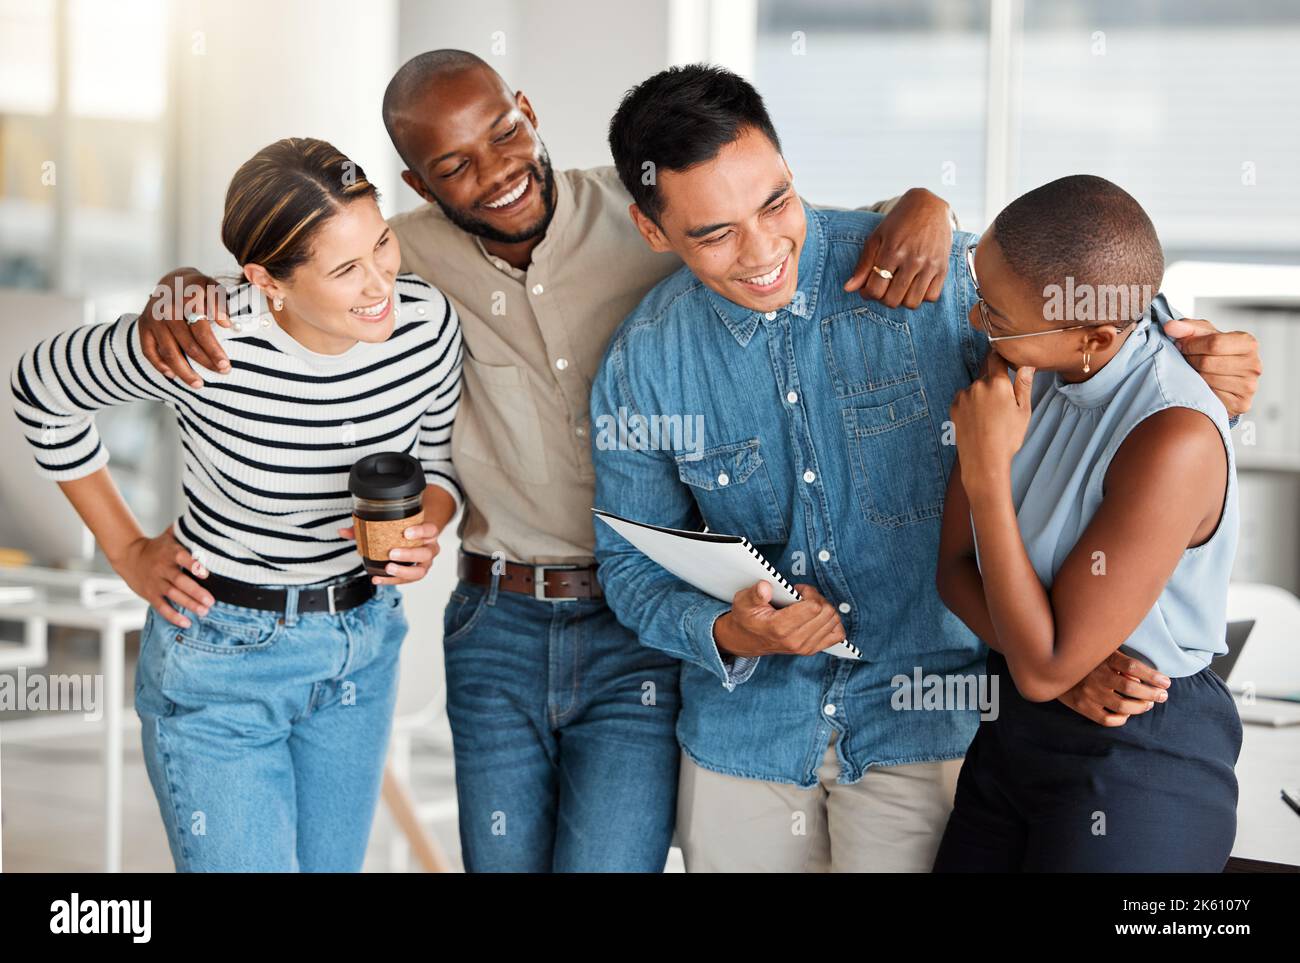 Group of diverse cheerful businesspeople spending time in an office together at work. Joyful business professionals smiling while bonding at work Stock Photo